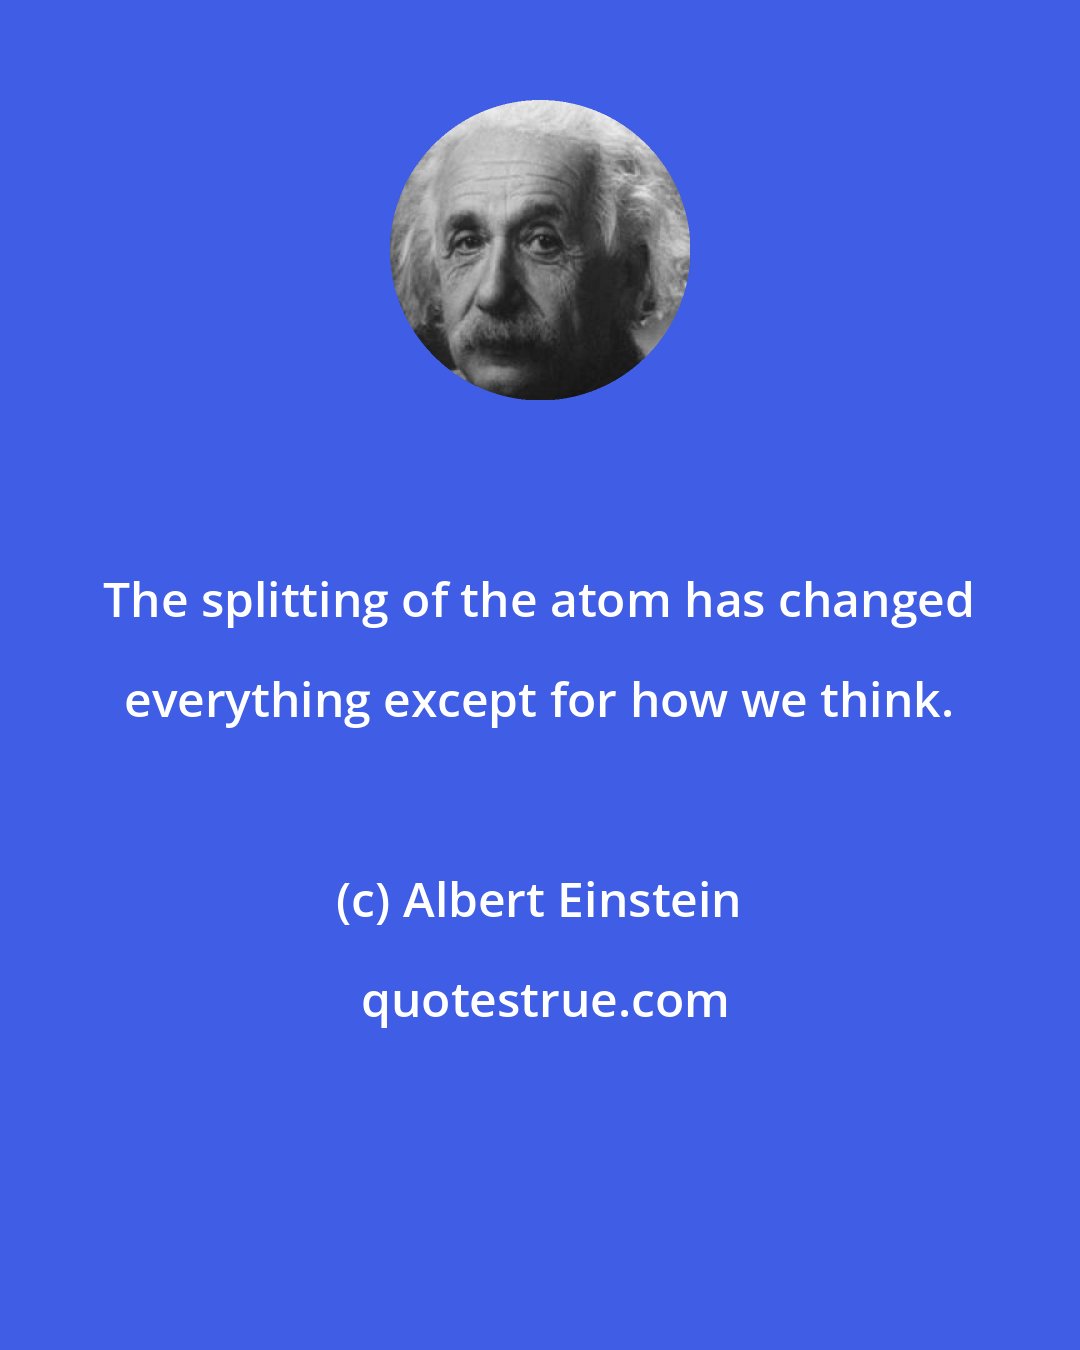 Albert Einstein: The splitting of the atom has changed everything except for how we think.